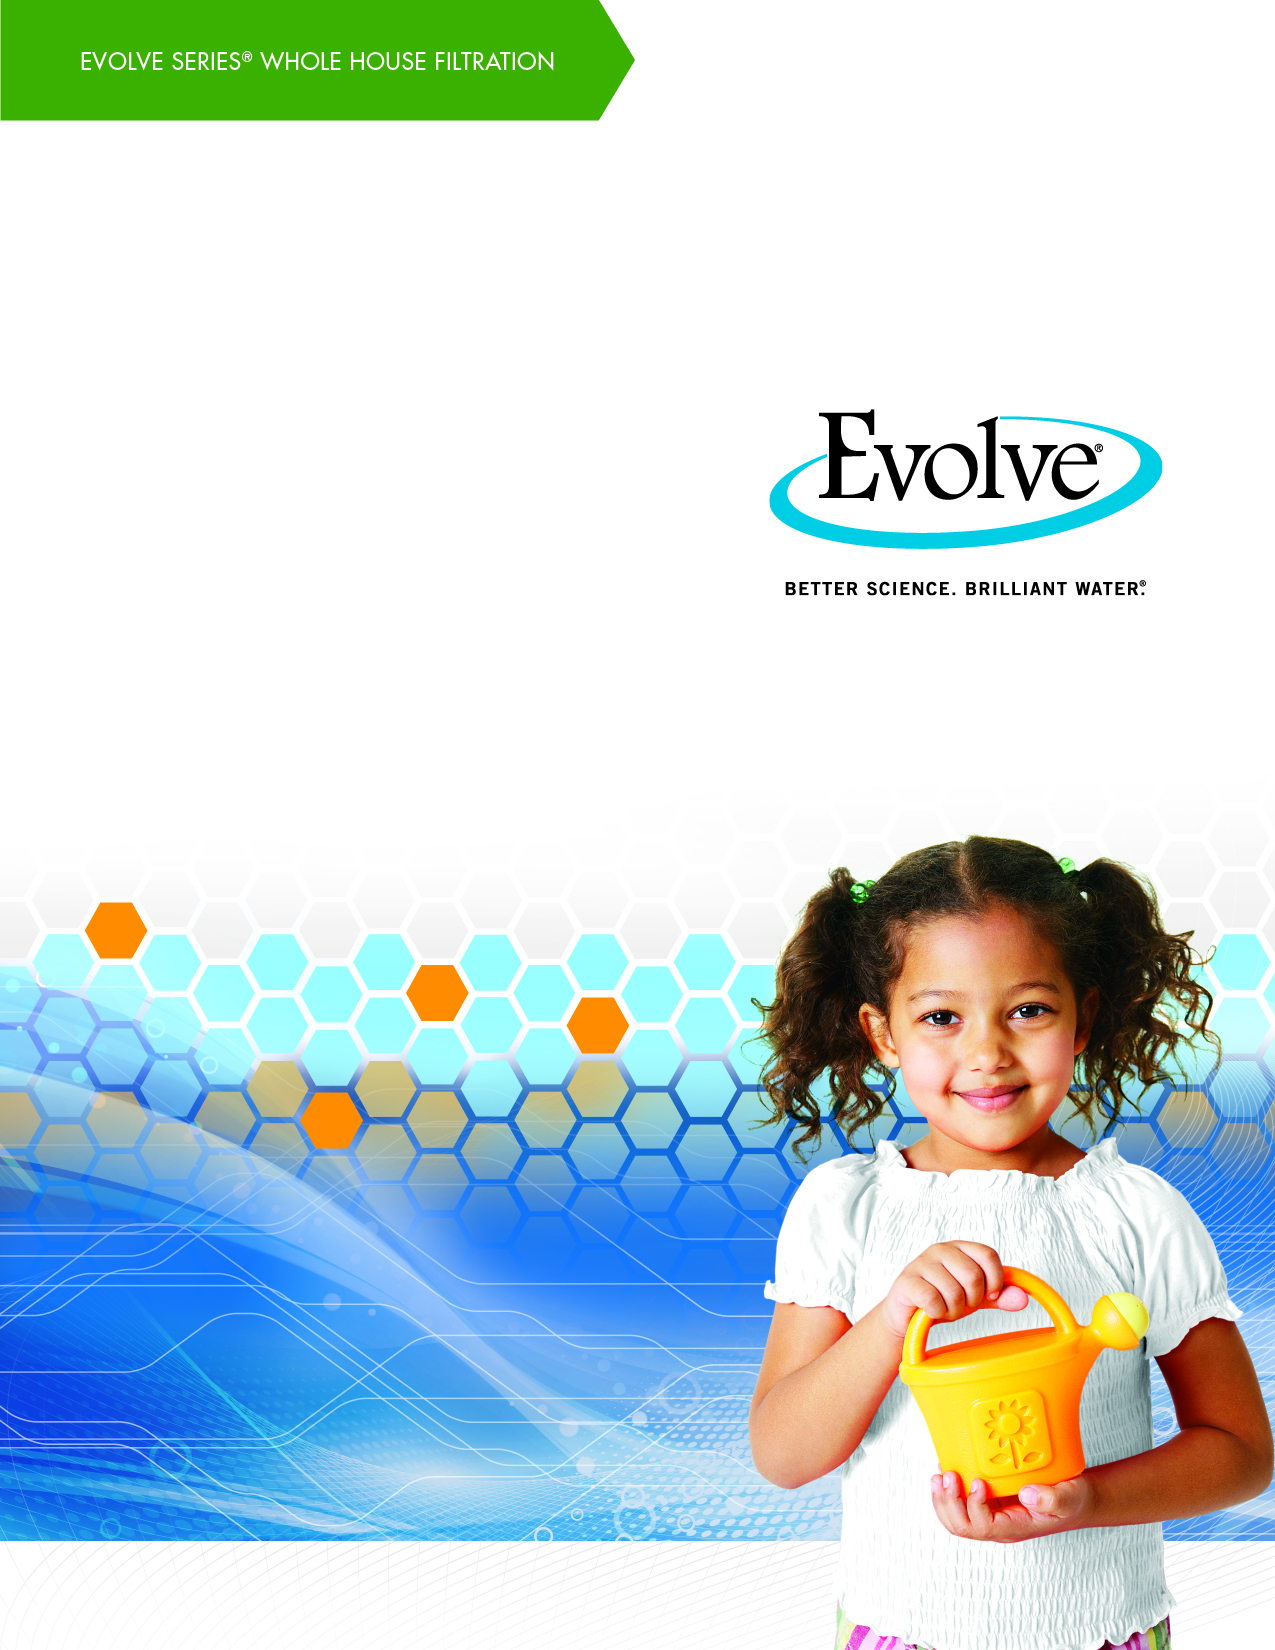 Evolve Series Whole House Filtration Brochure-image